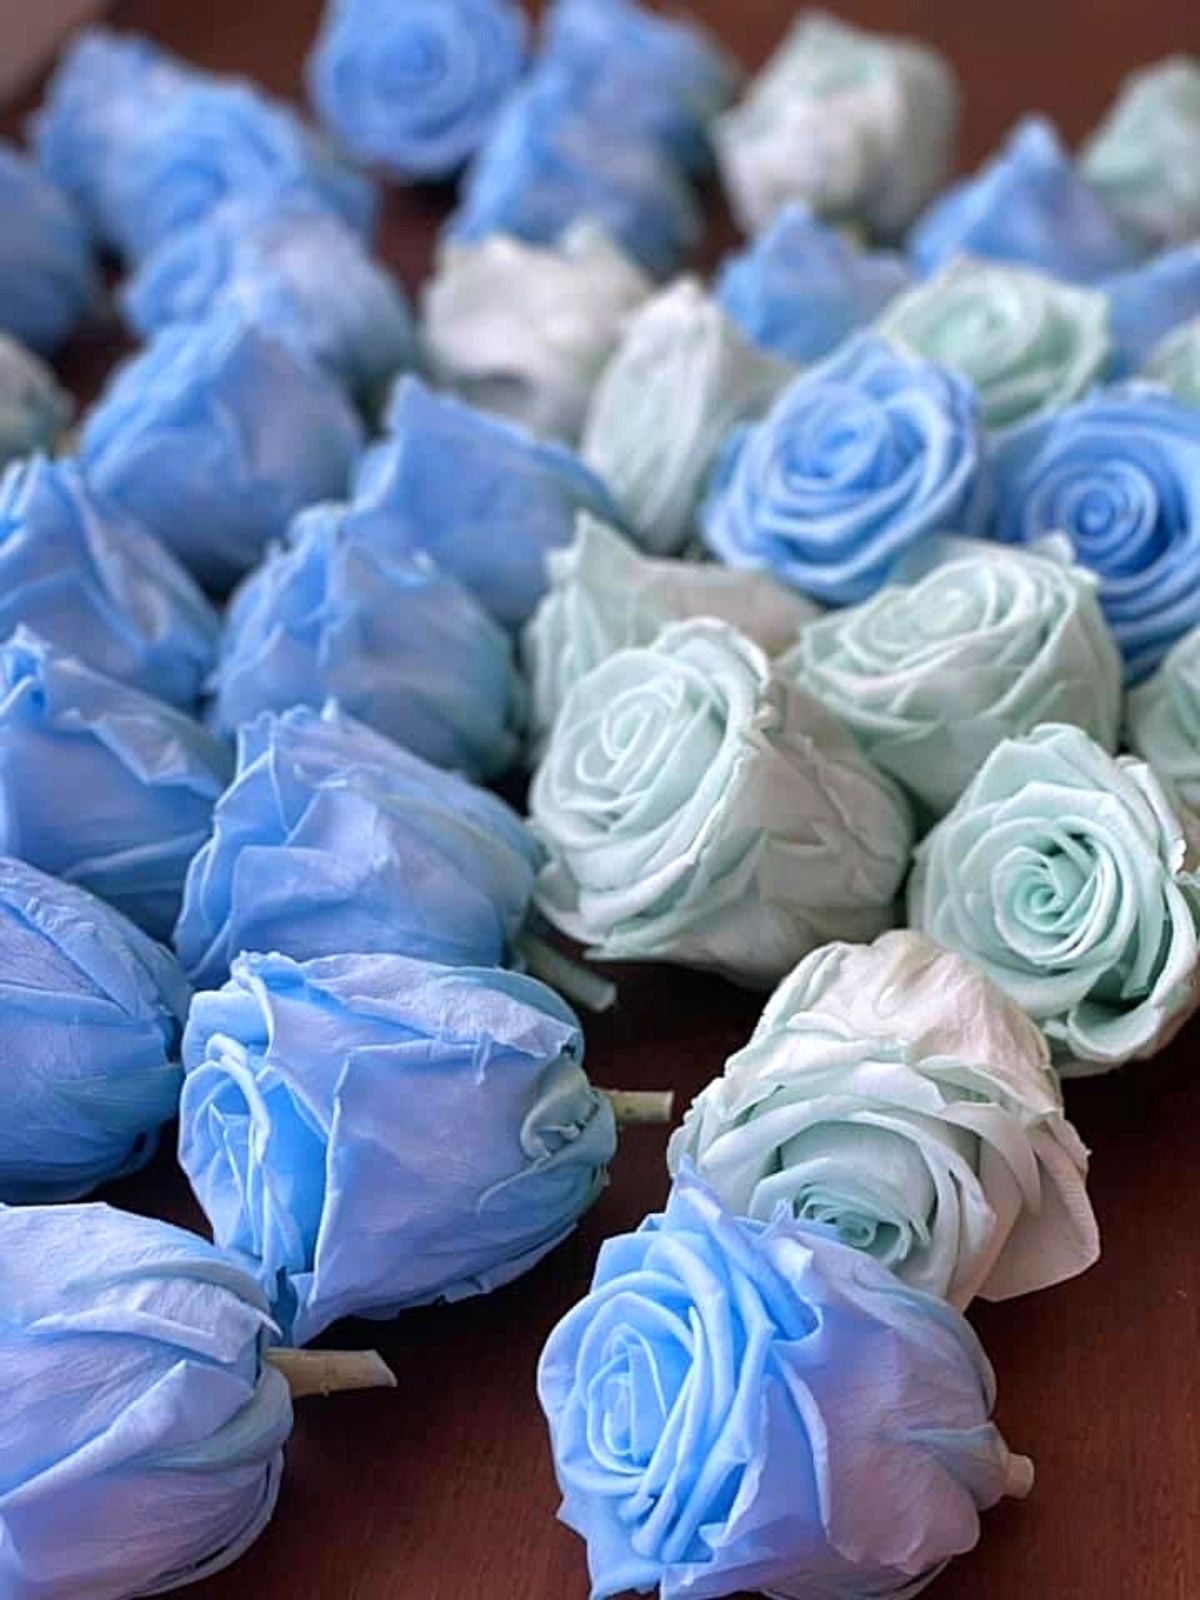 Chantal Post Dares to Combine Fresh Flowers With Dried and Lulu Preserved Roses - Article on Thursd (6)